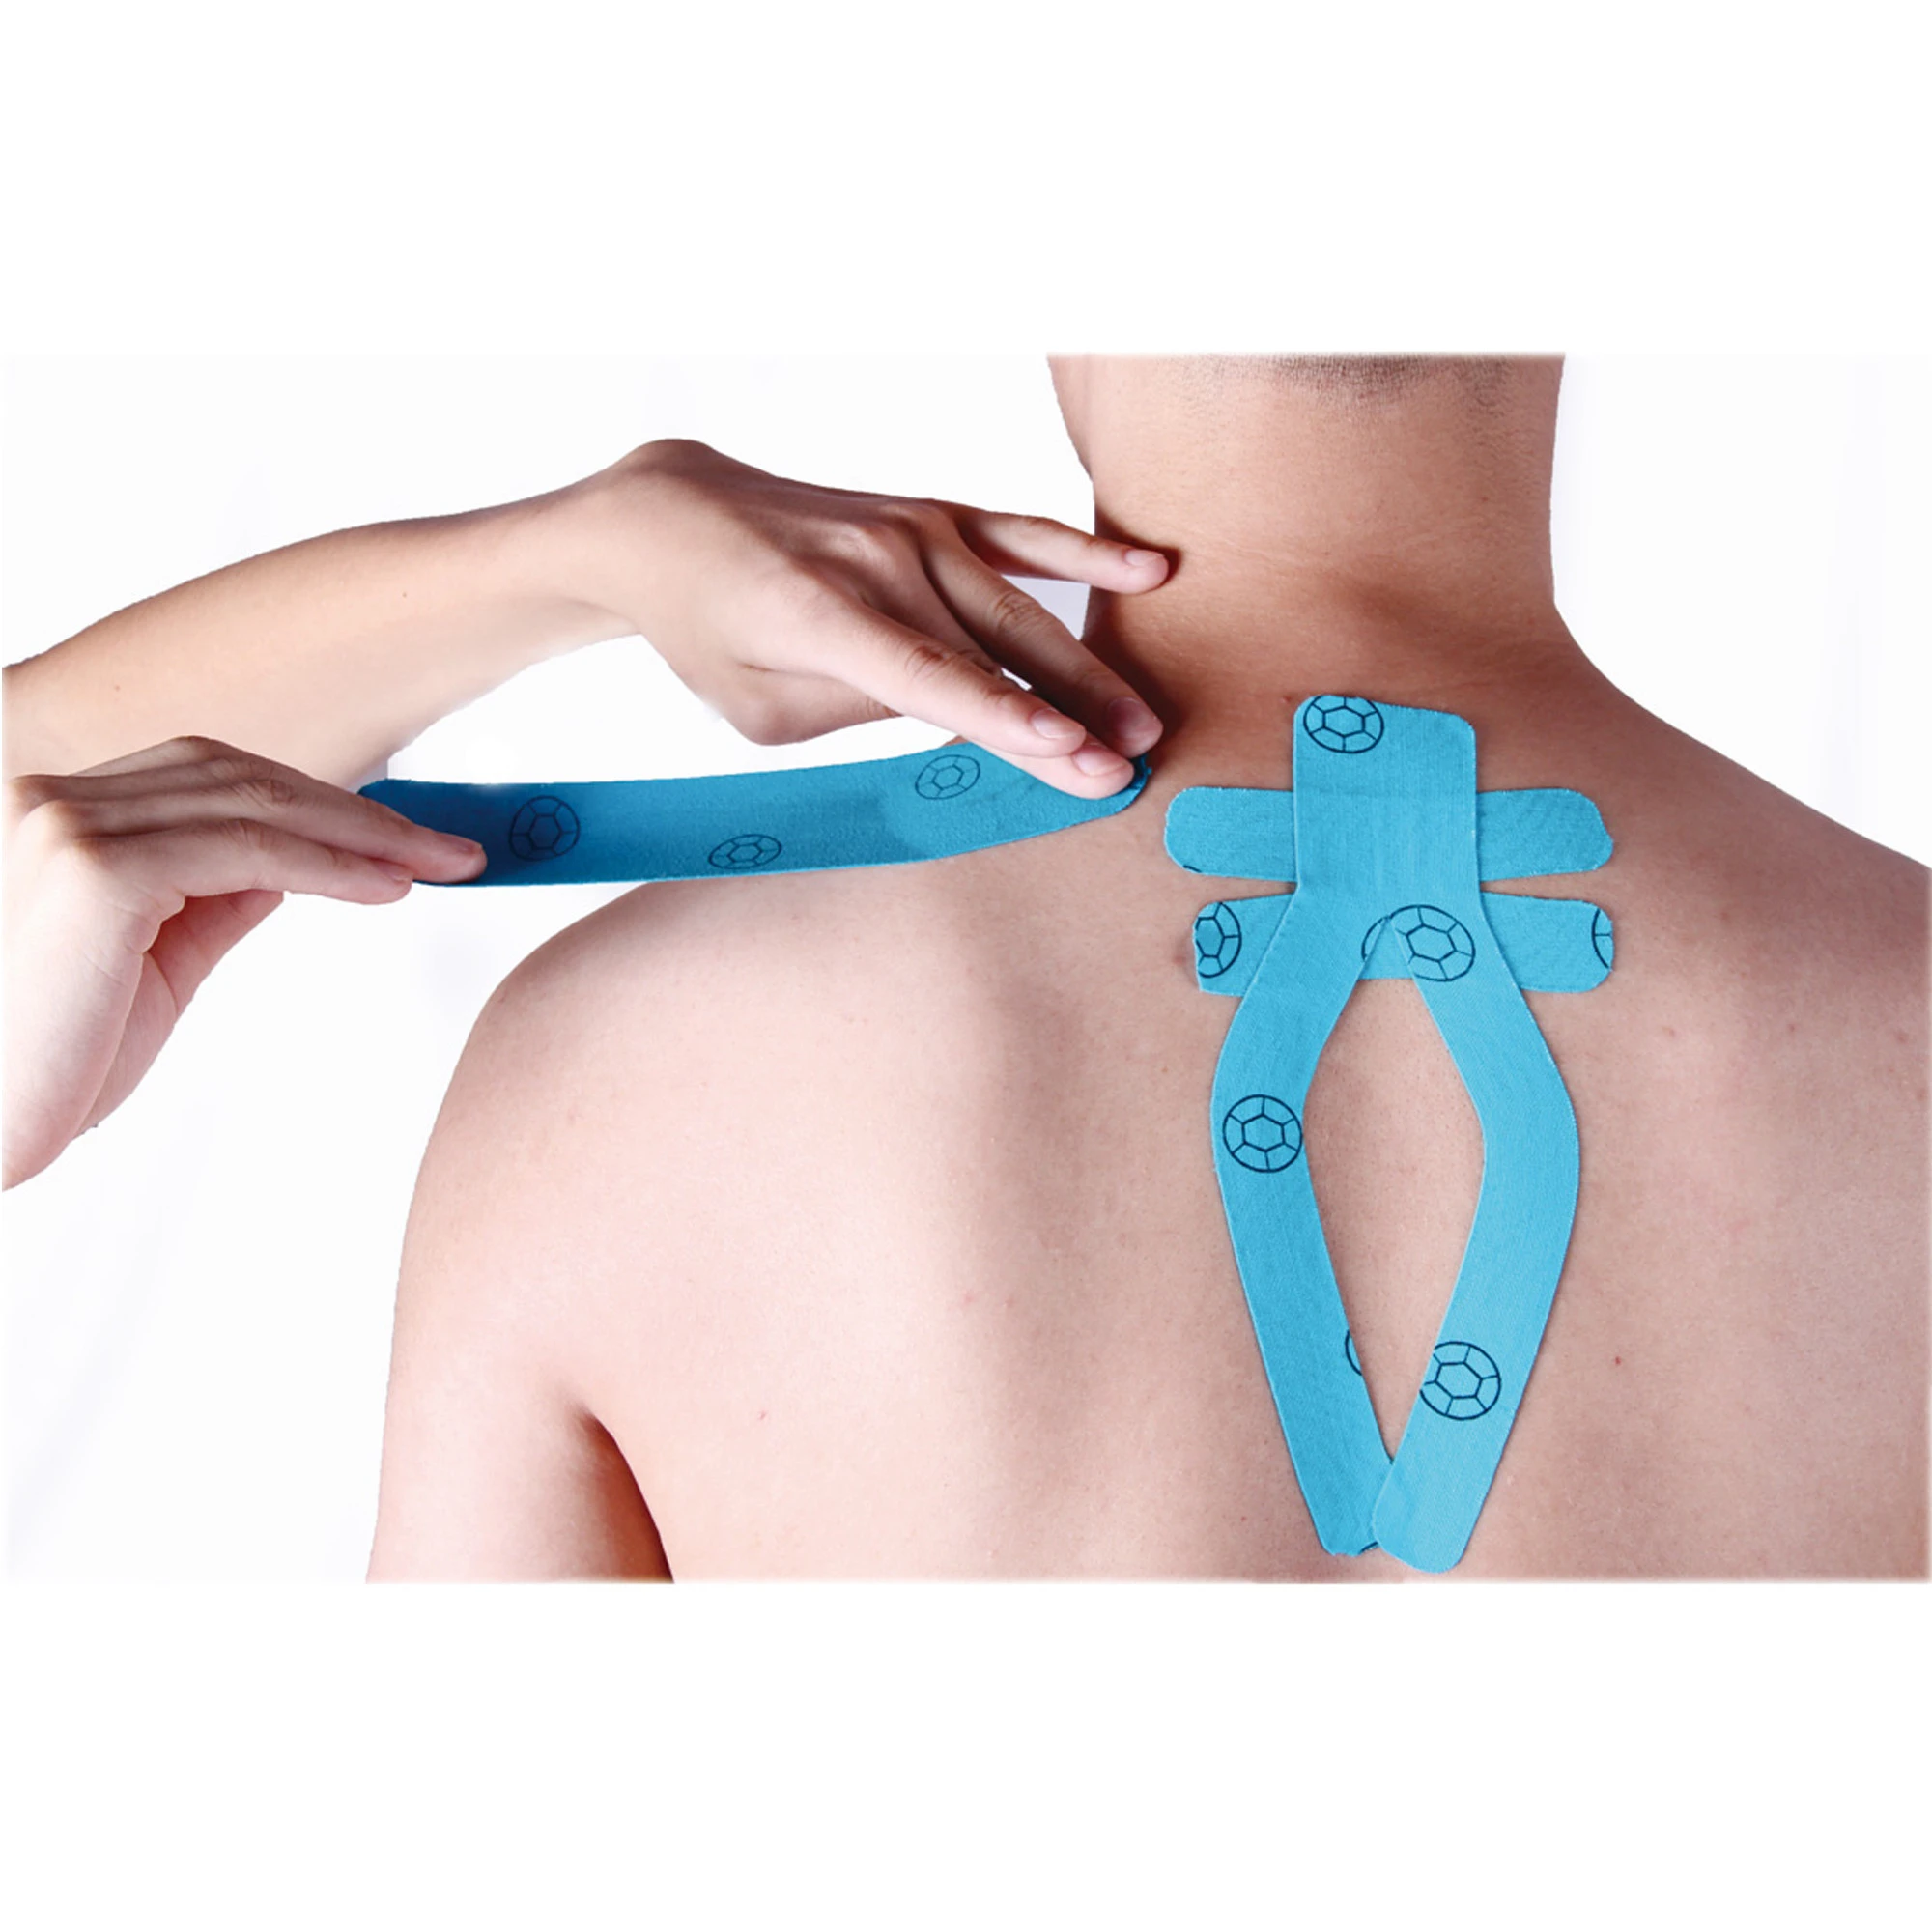 Kintape for Lower Back Pain Exercises plus protection and helpful physio therapy Treartment